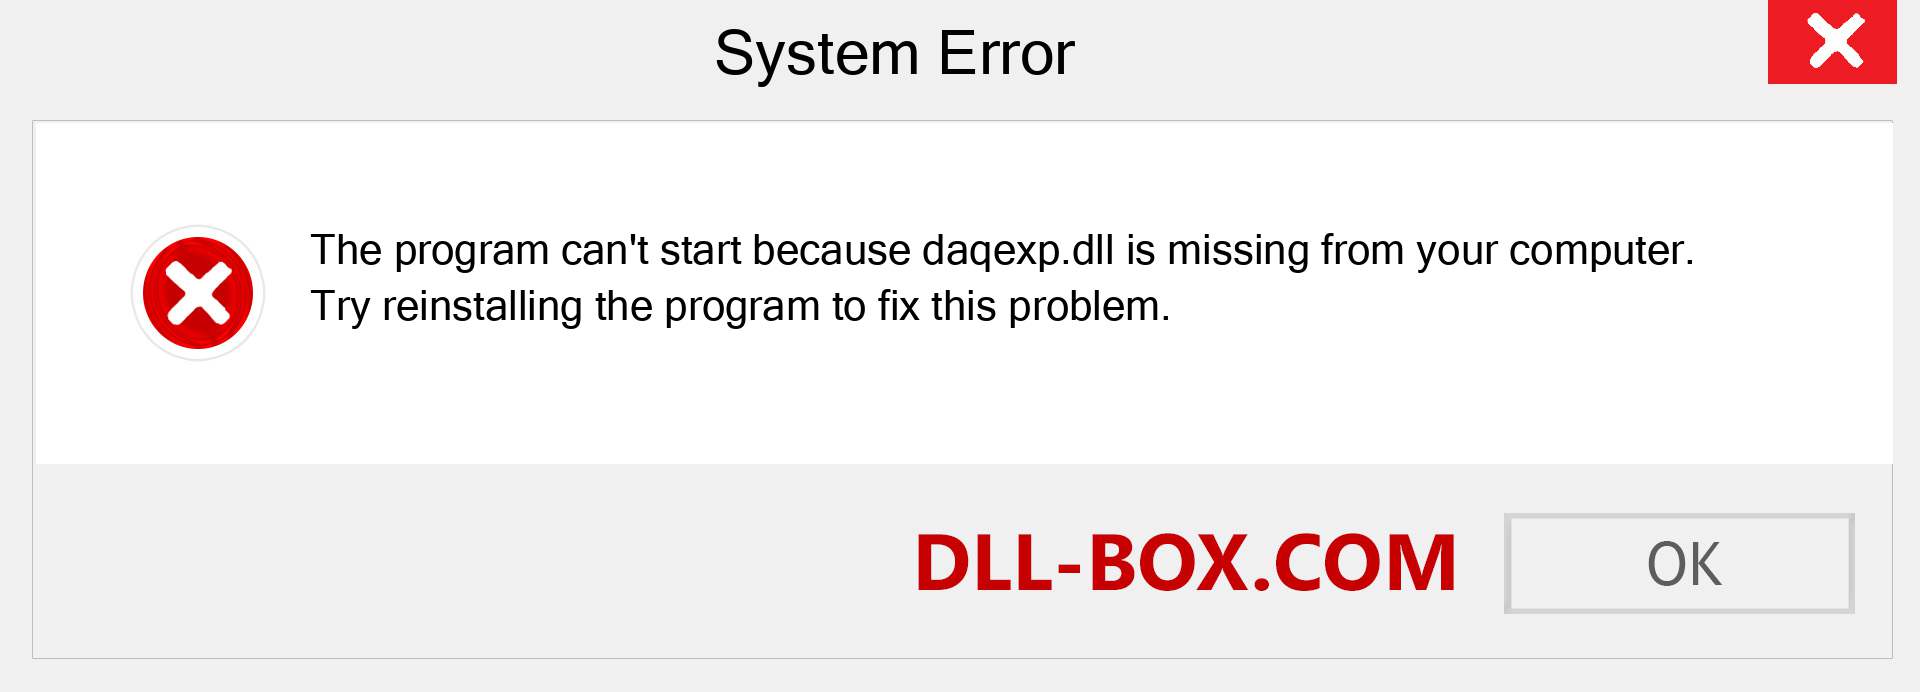  daqexp.dll file is missing?. Download for Windows 7, 8, 10 - Fix  daqexp dll Missing Error on Windows, photos, images